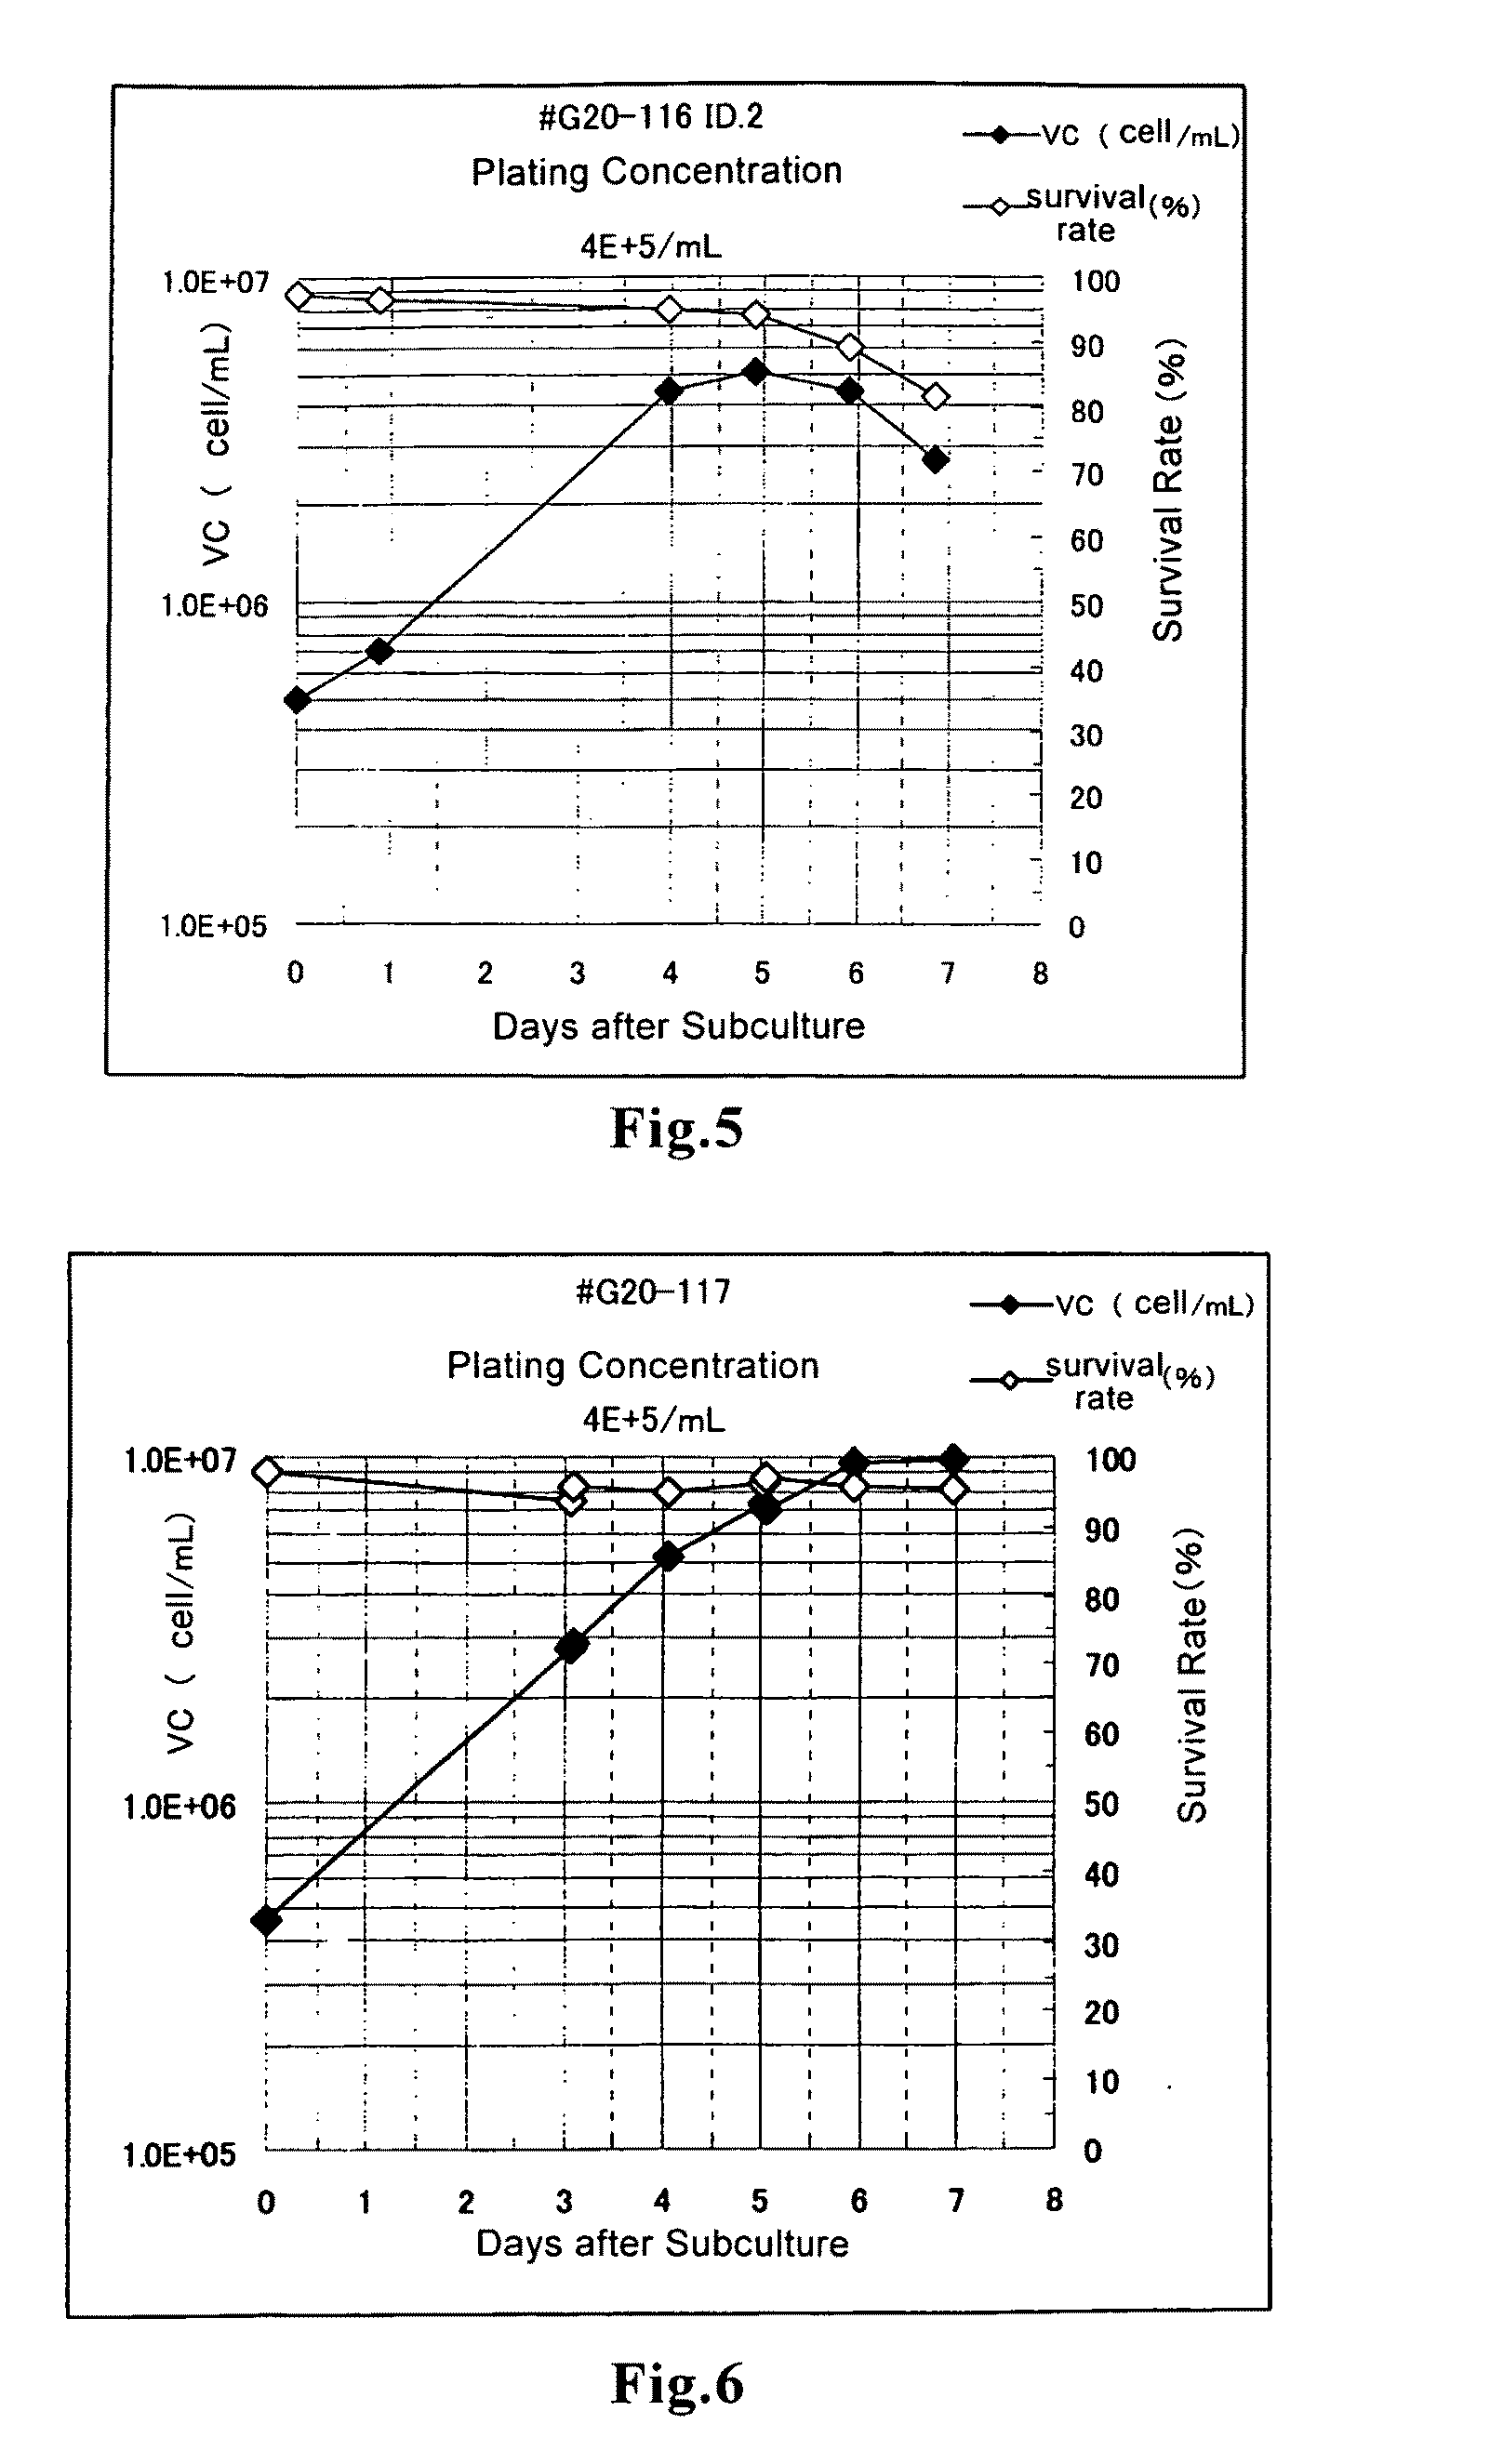 Methods for the production of hemagglutinating virus of Japan and adenovirus using cultured cells